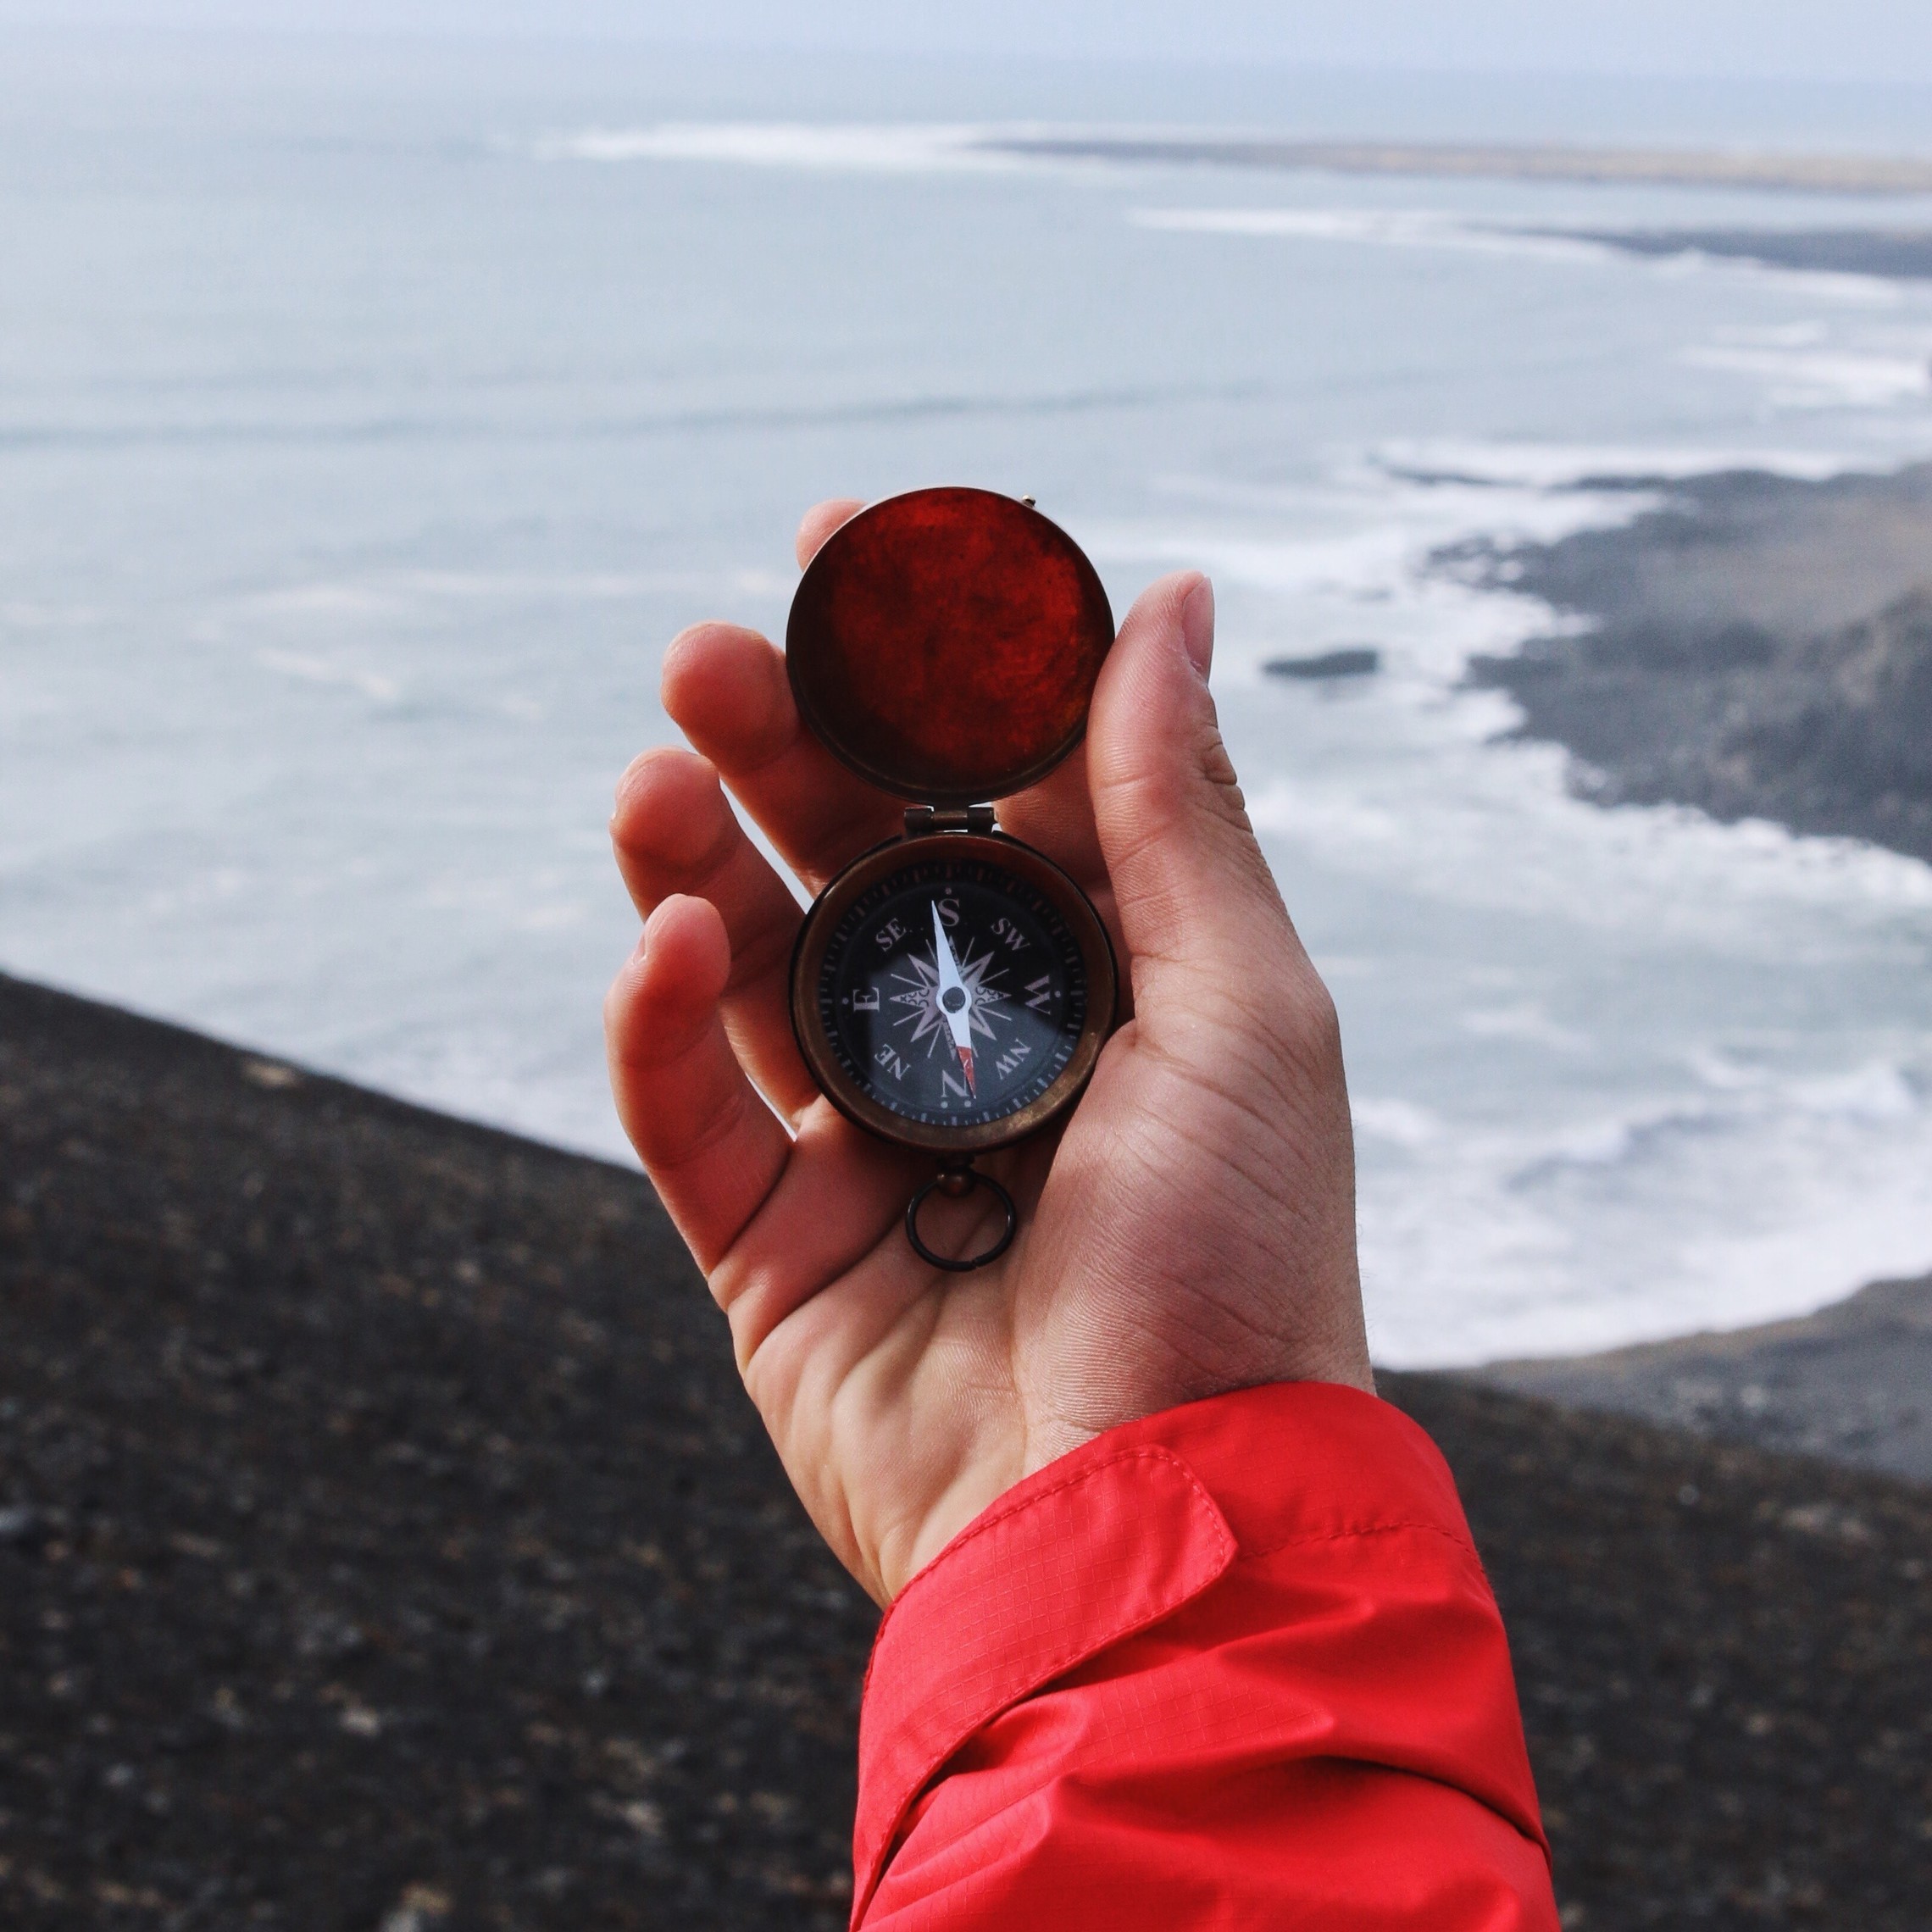 Holding a compass at the seashore